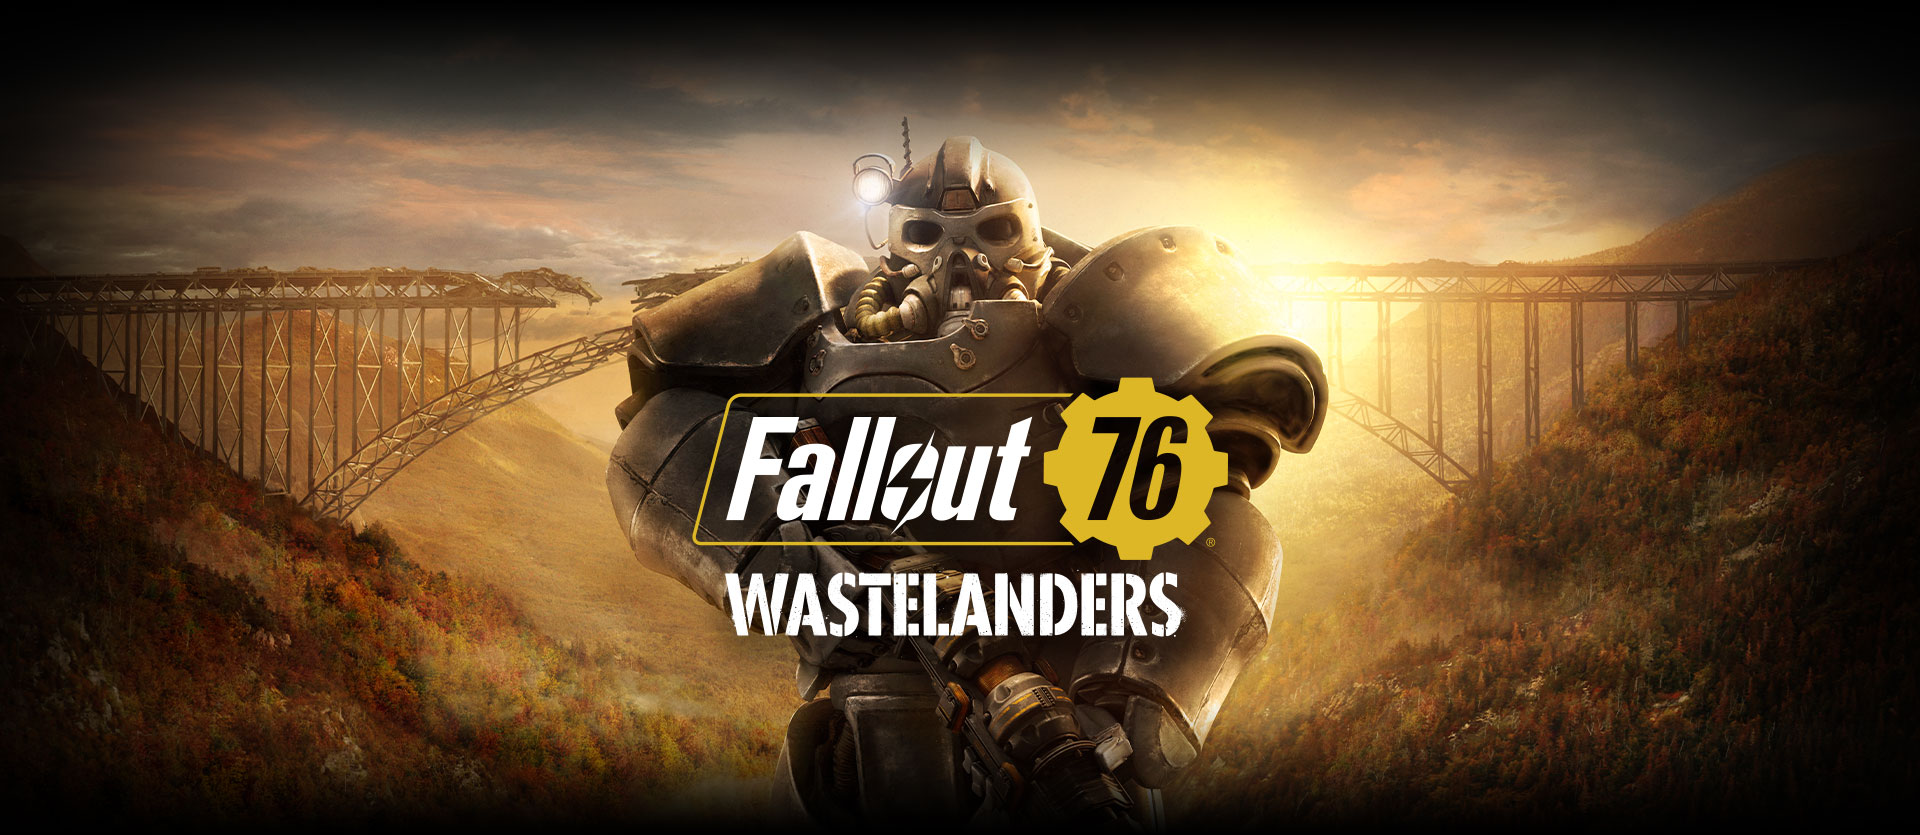 fallout 76 download deal xbox